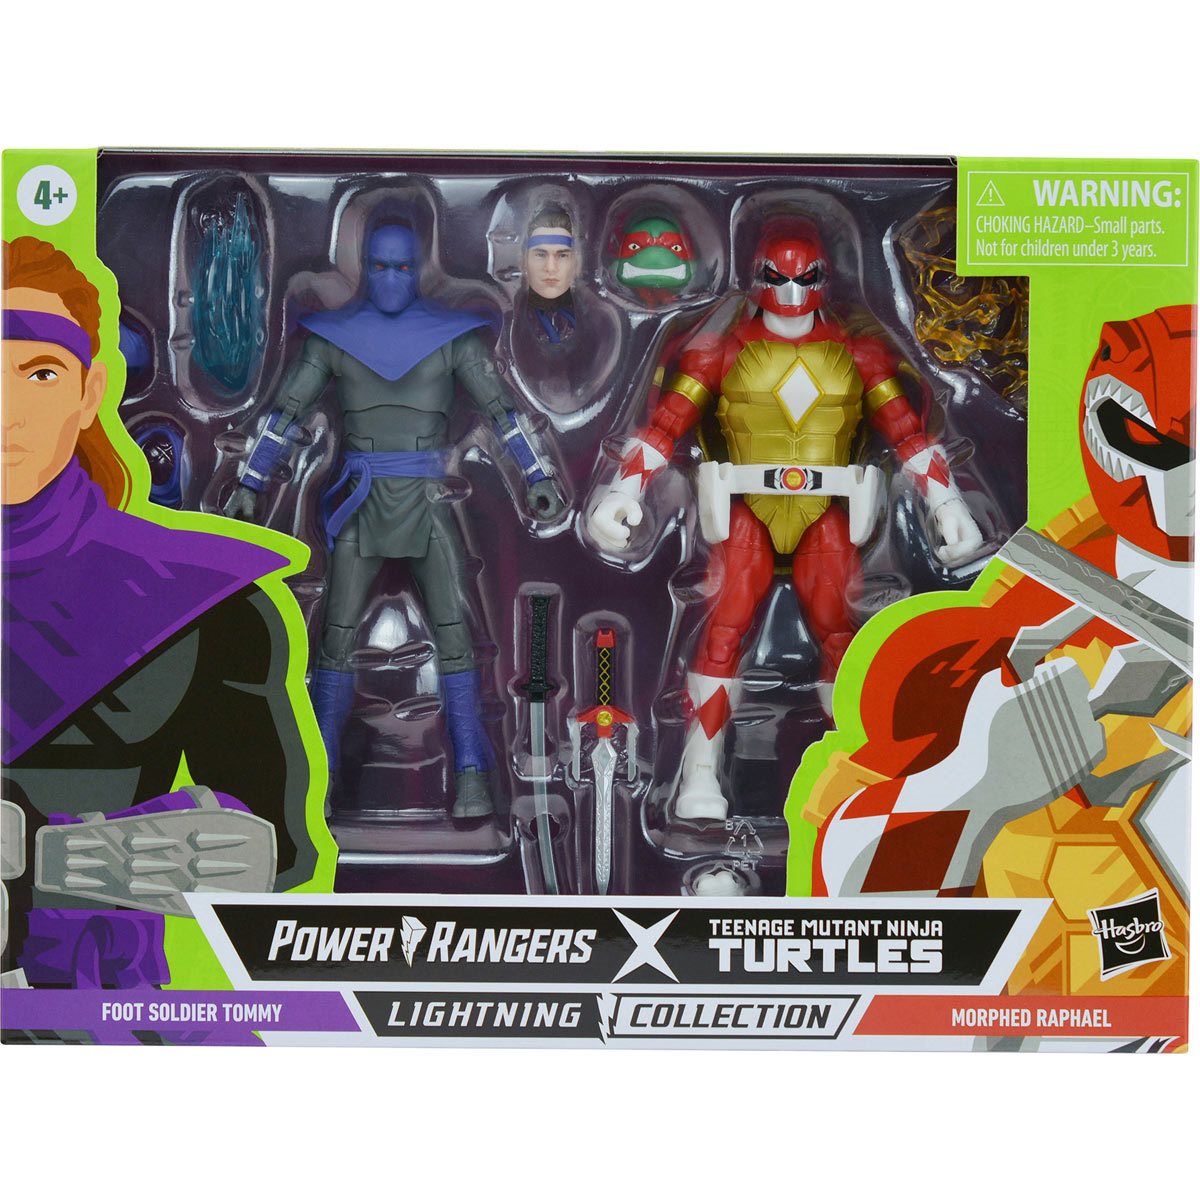 Power Rangers X Teenage Mutant Ninja Turtles: Lightning Collection - Foot Soldier Tommy and Raphael Red Action Figures